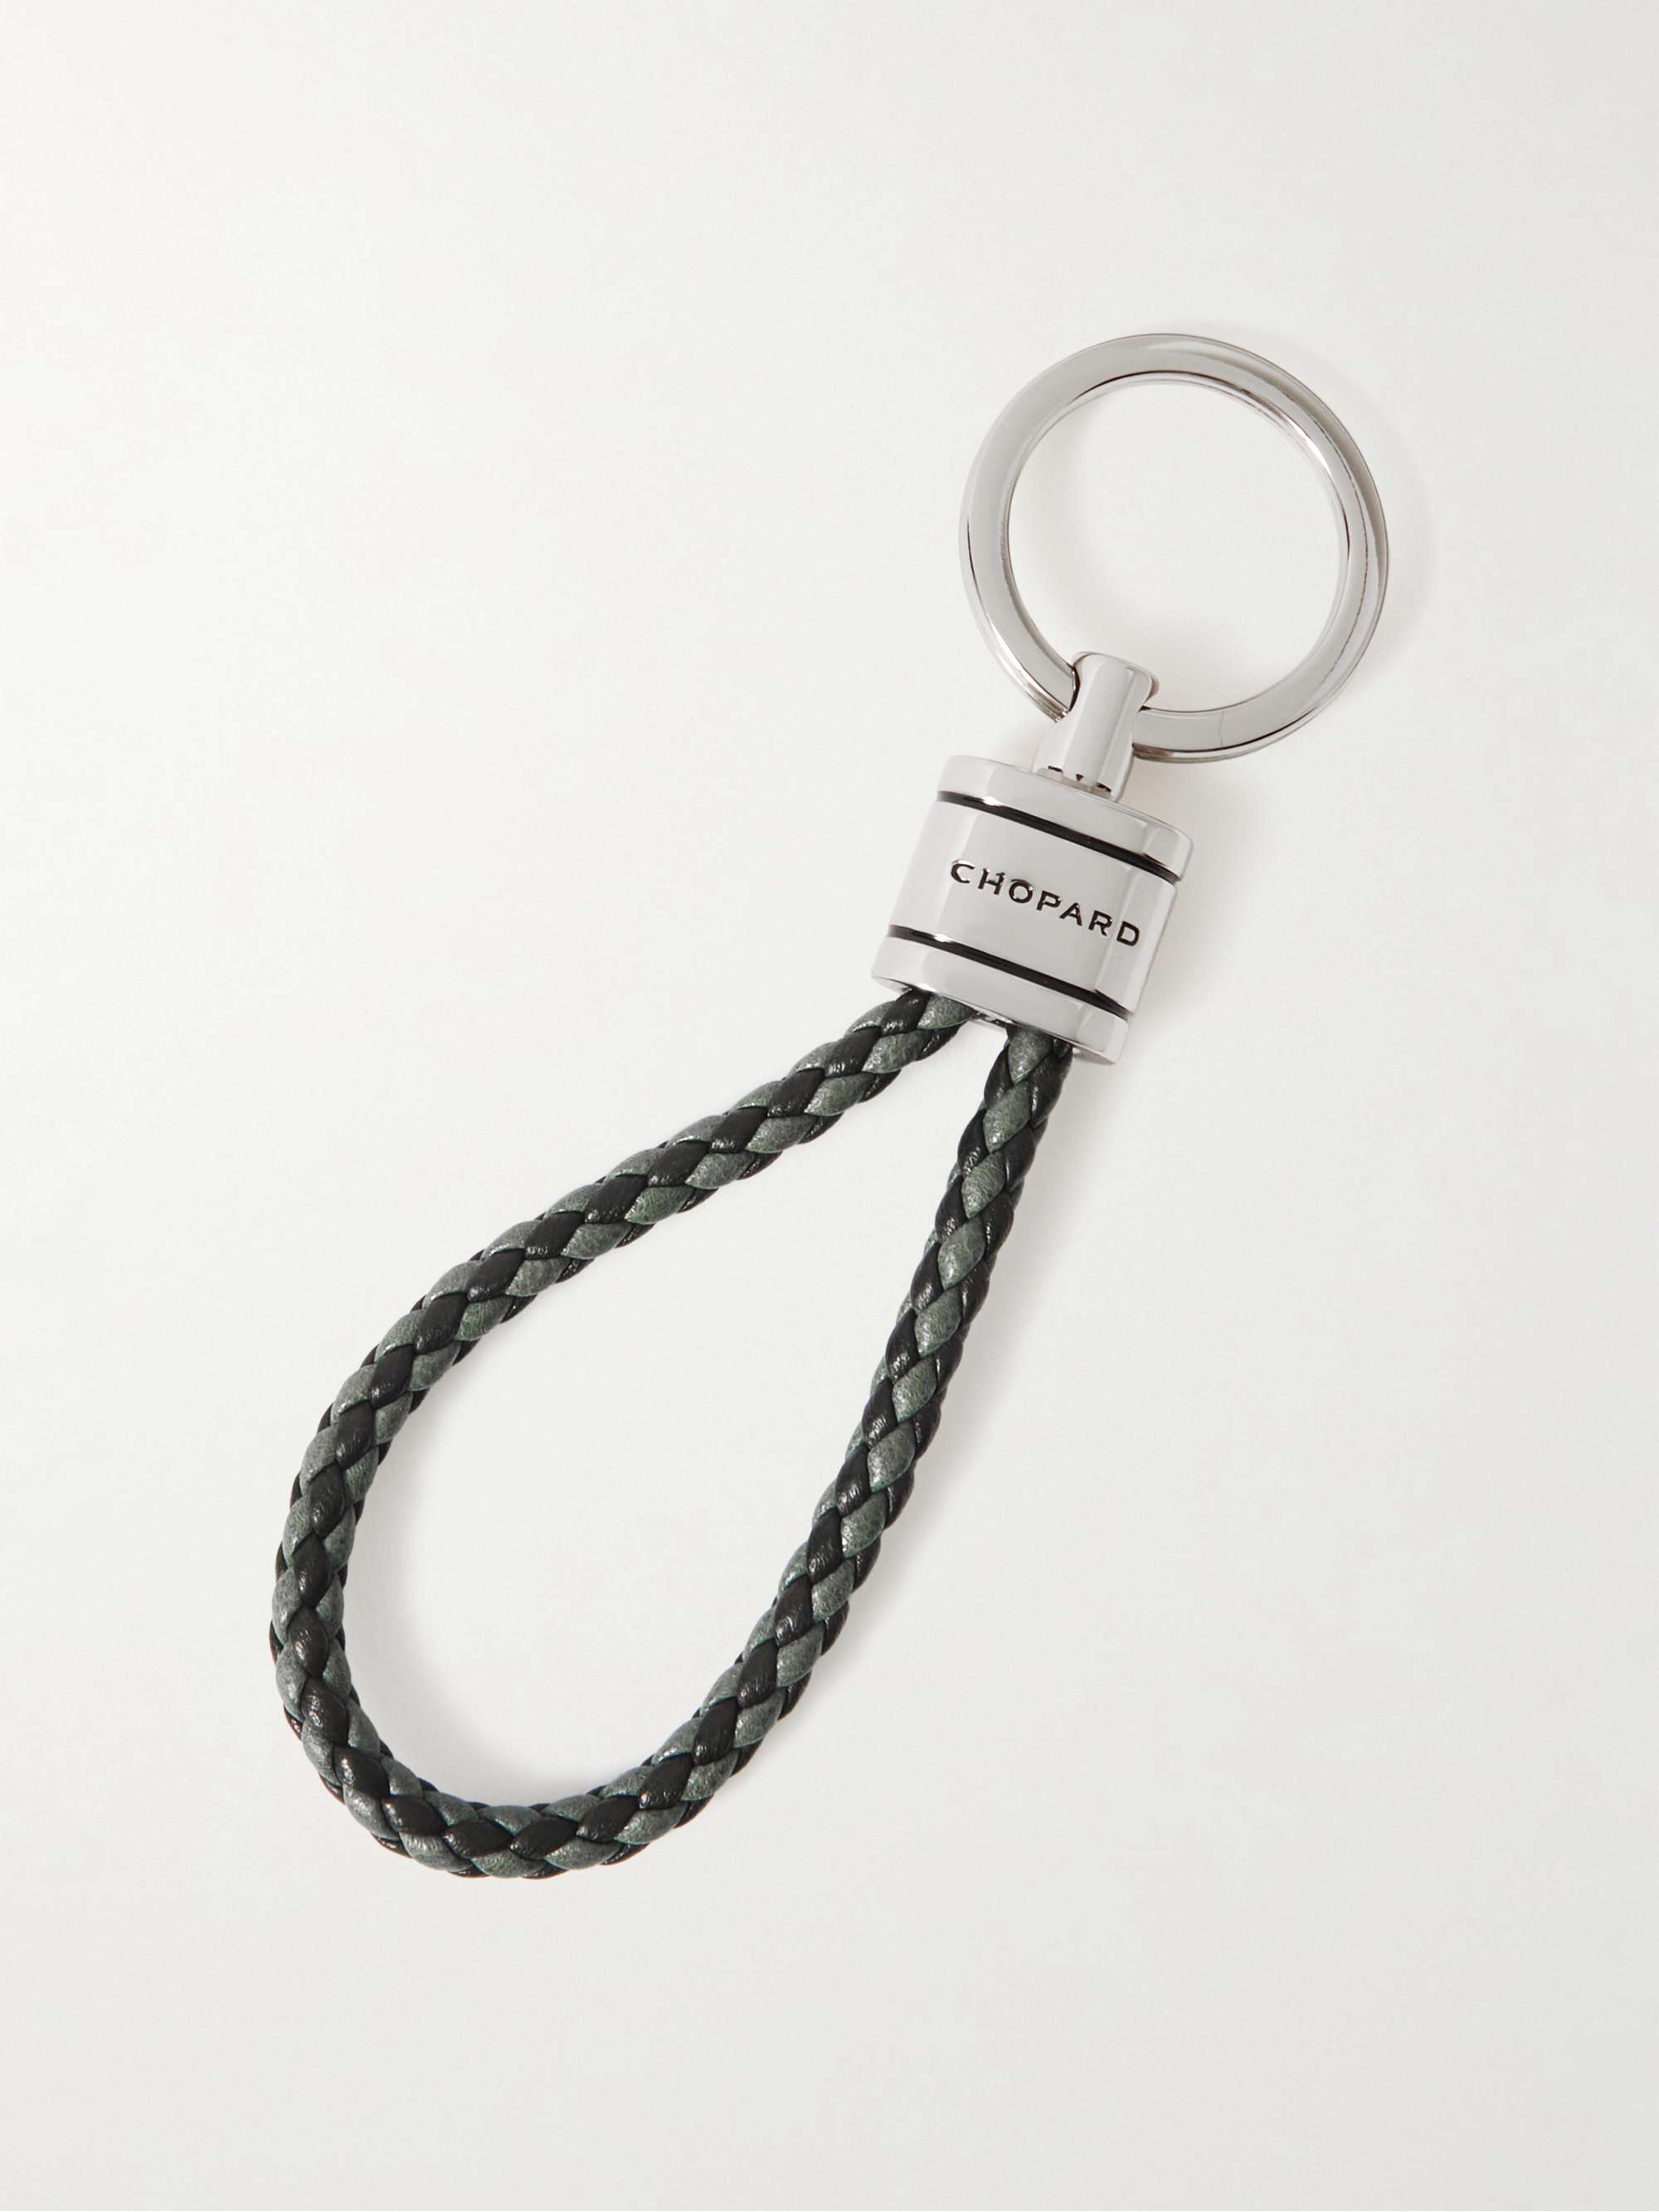 CHOPARD Braided Leather and Silver-Tone Keyring | MR PORTER